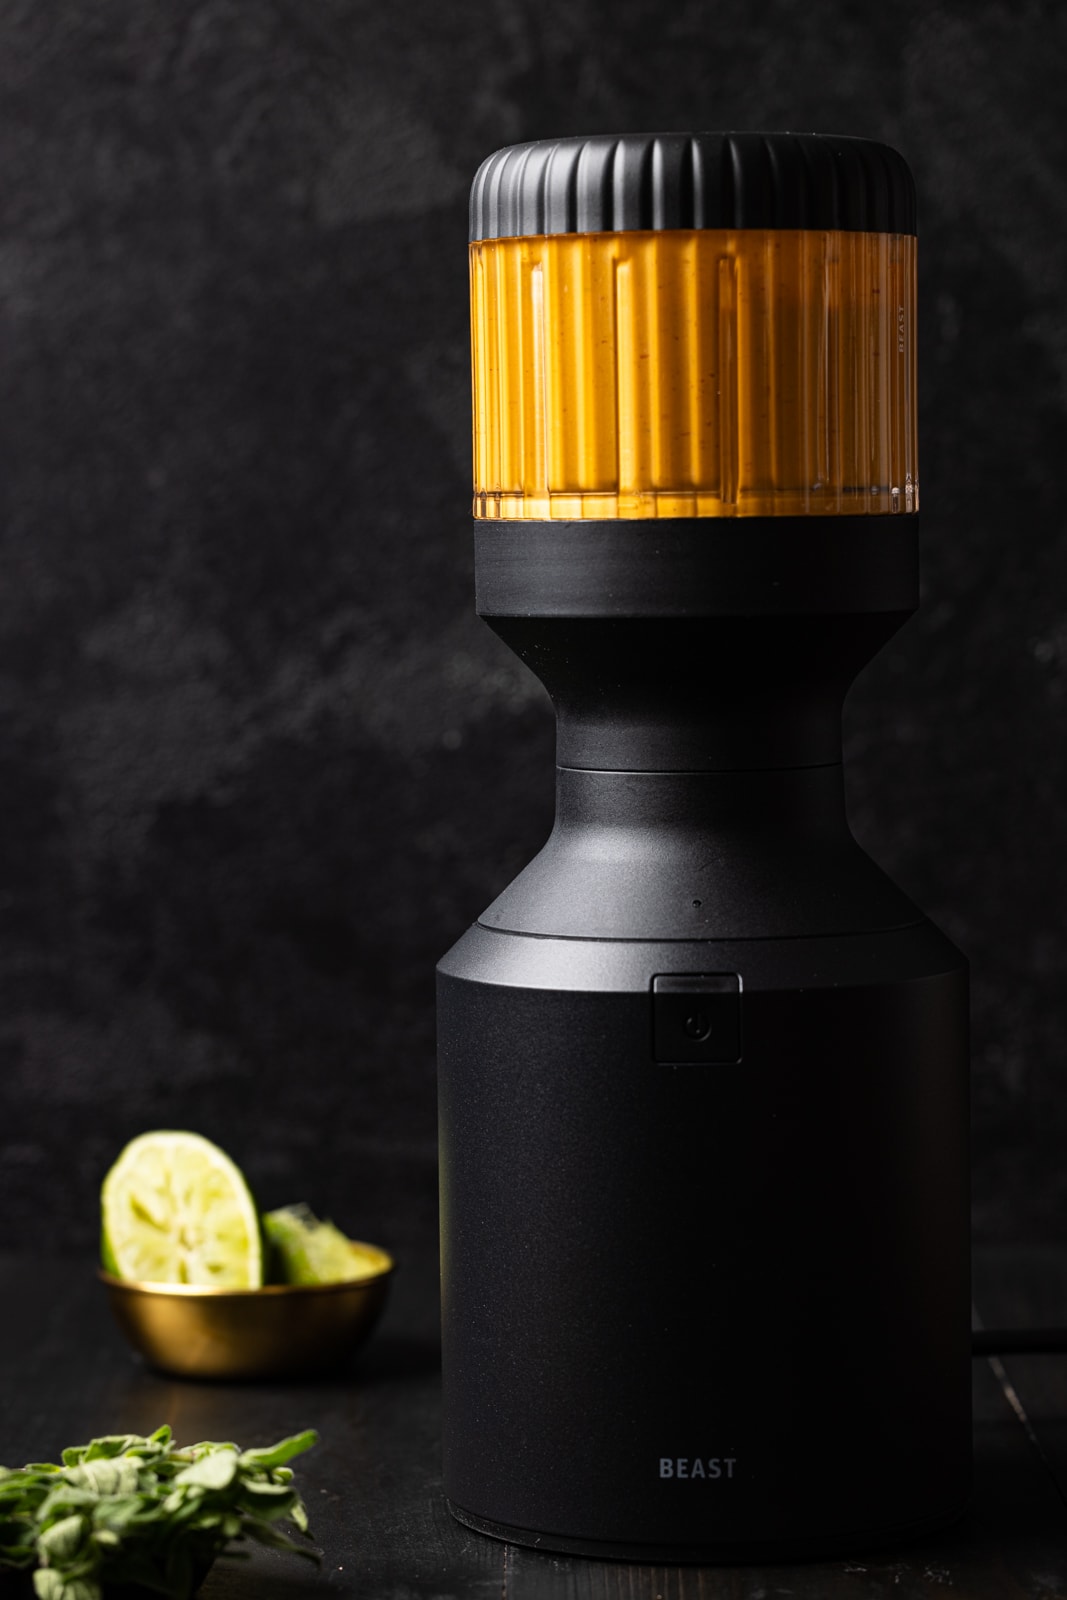 Sauce in a black blender on a black table with herbs and lime.